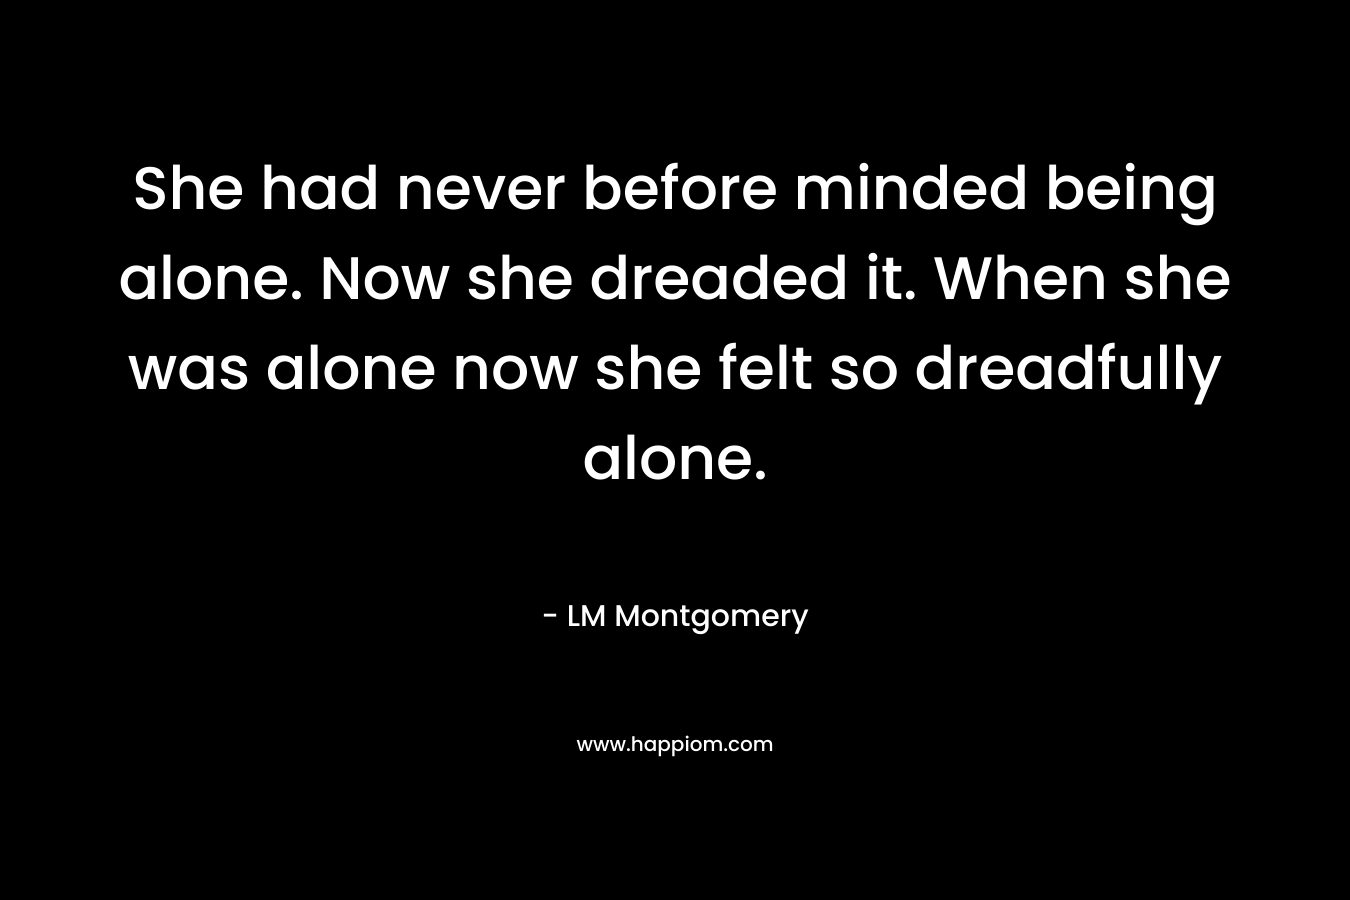 She had never before minded being alone. Now she dreaded it. When she was alone now she felt so dreadfully alone.